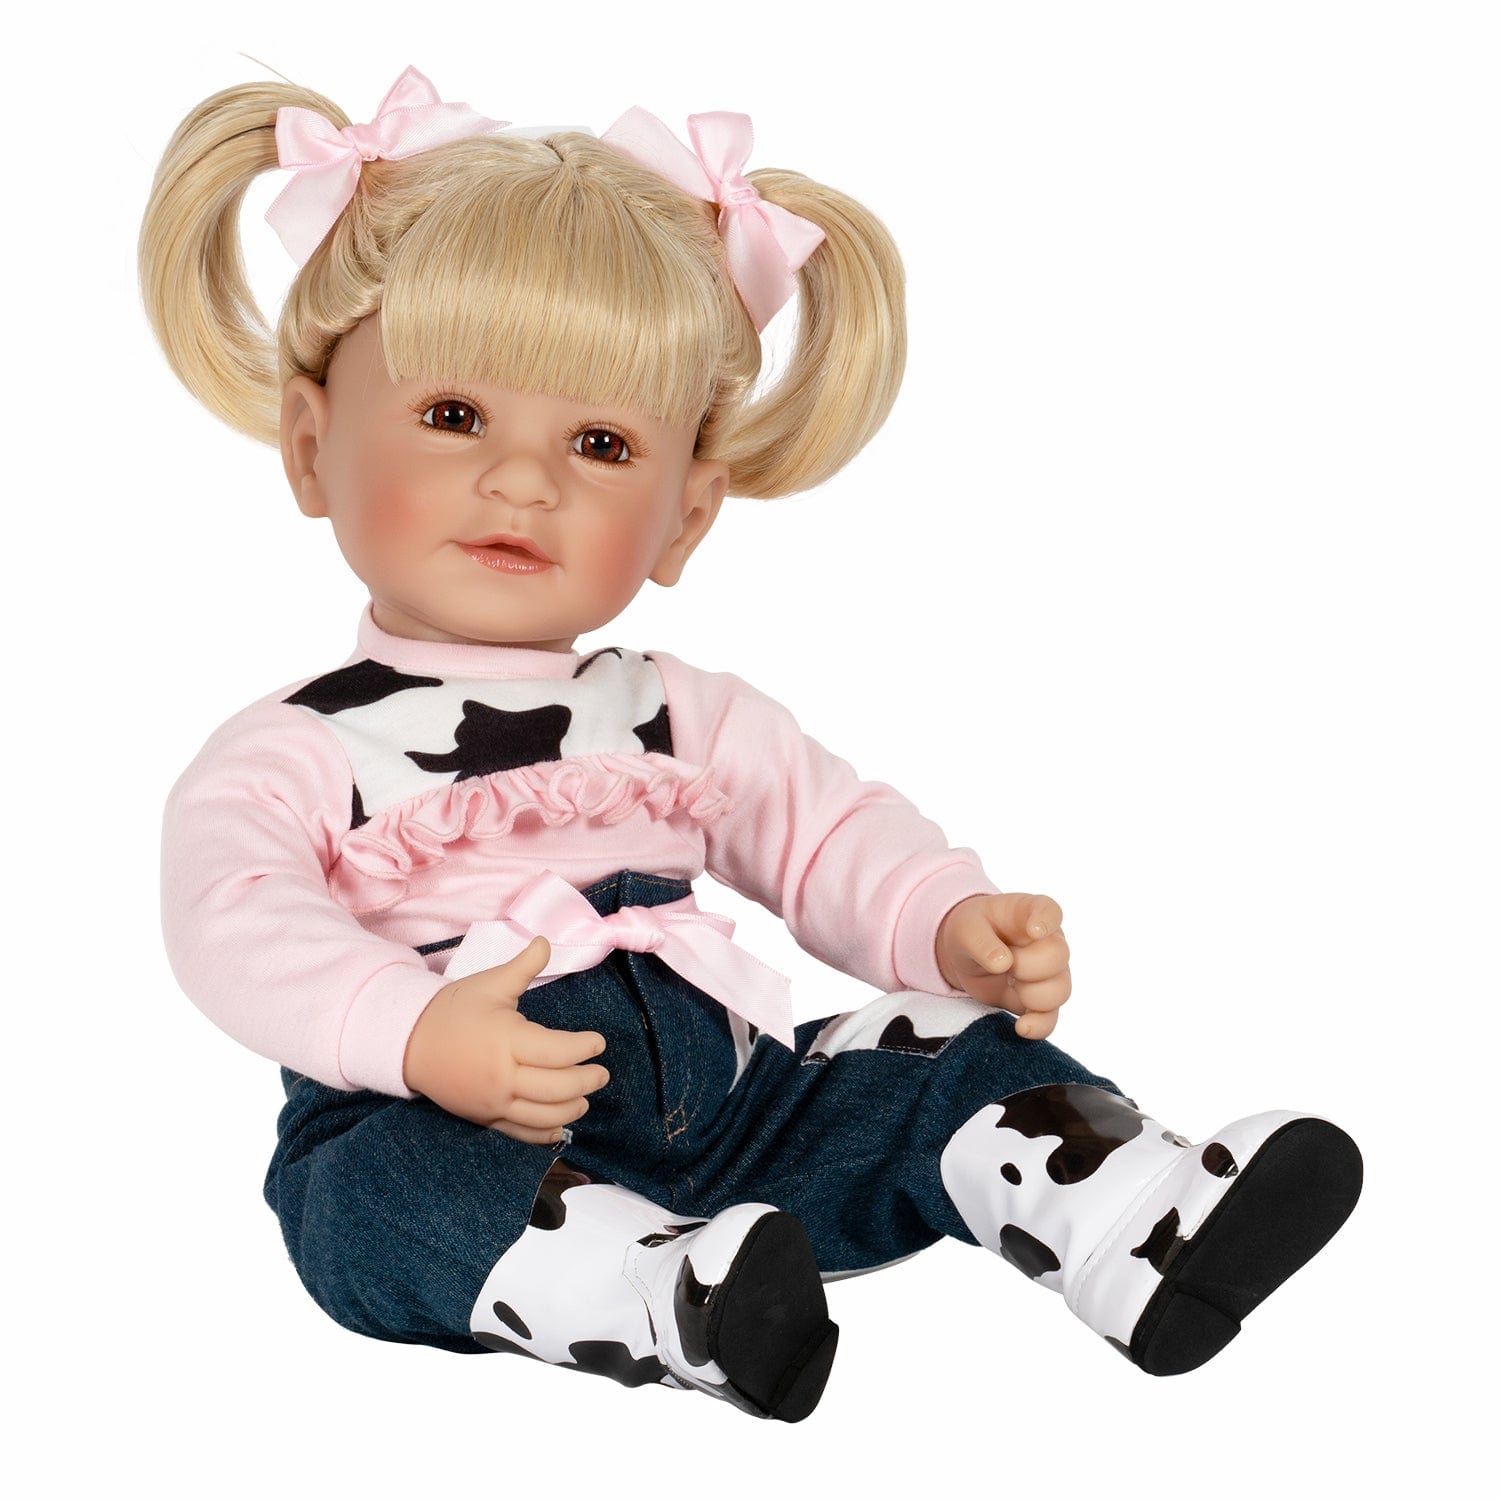 Adora ToddlerTime Baby Doll - I Love Moo Doll, Clothes & Accessories Set